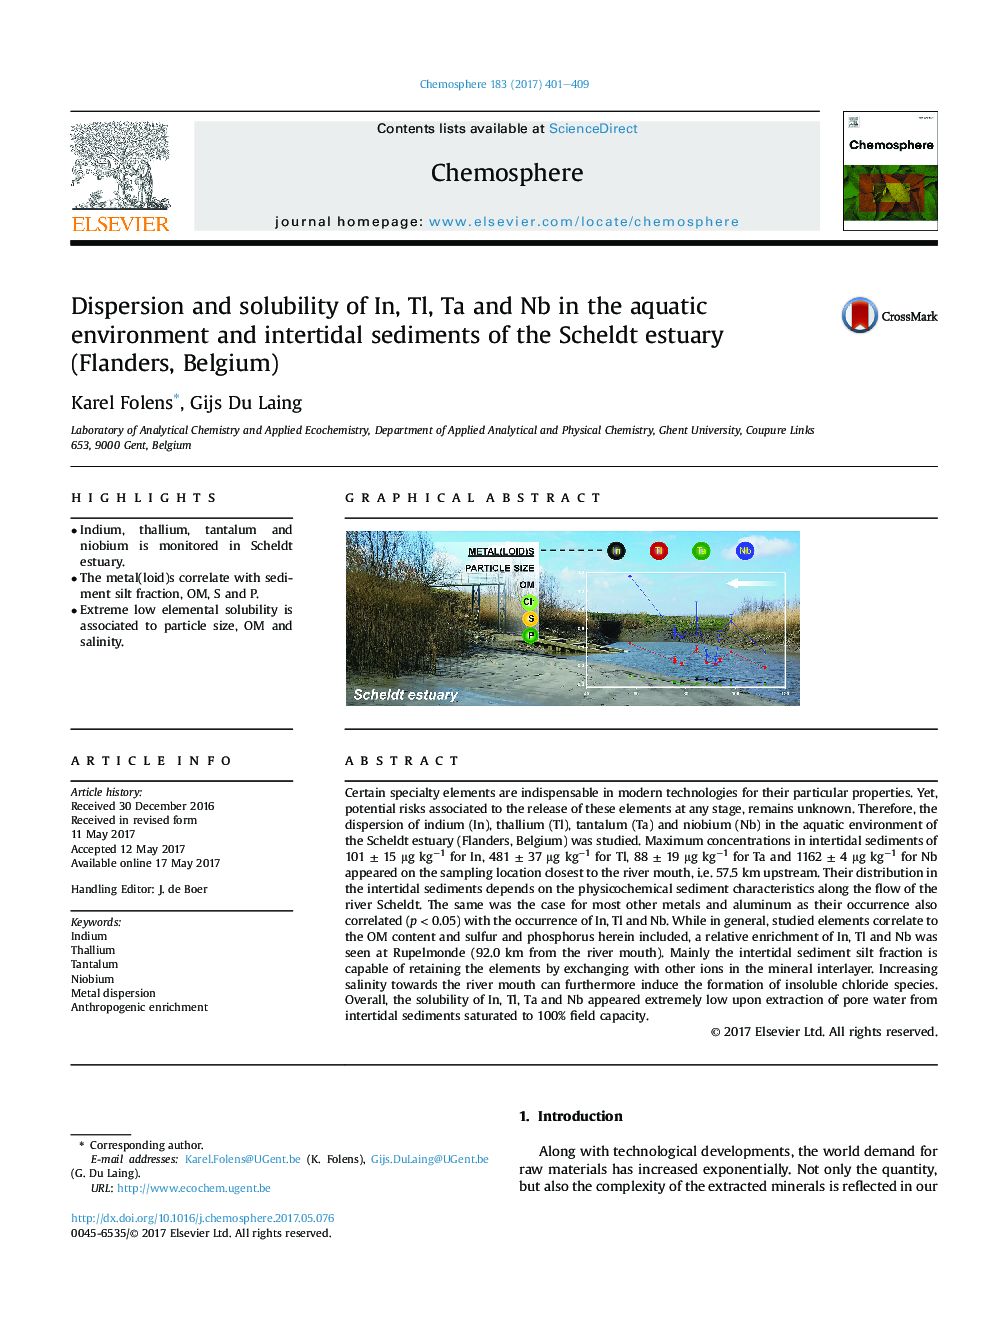 Dispersion and solubility of In, Tl, Ta and Nb in the aquatic environment and intertidal sediments of the Scheldt estuary (Flanders, Belgium)